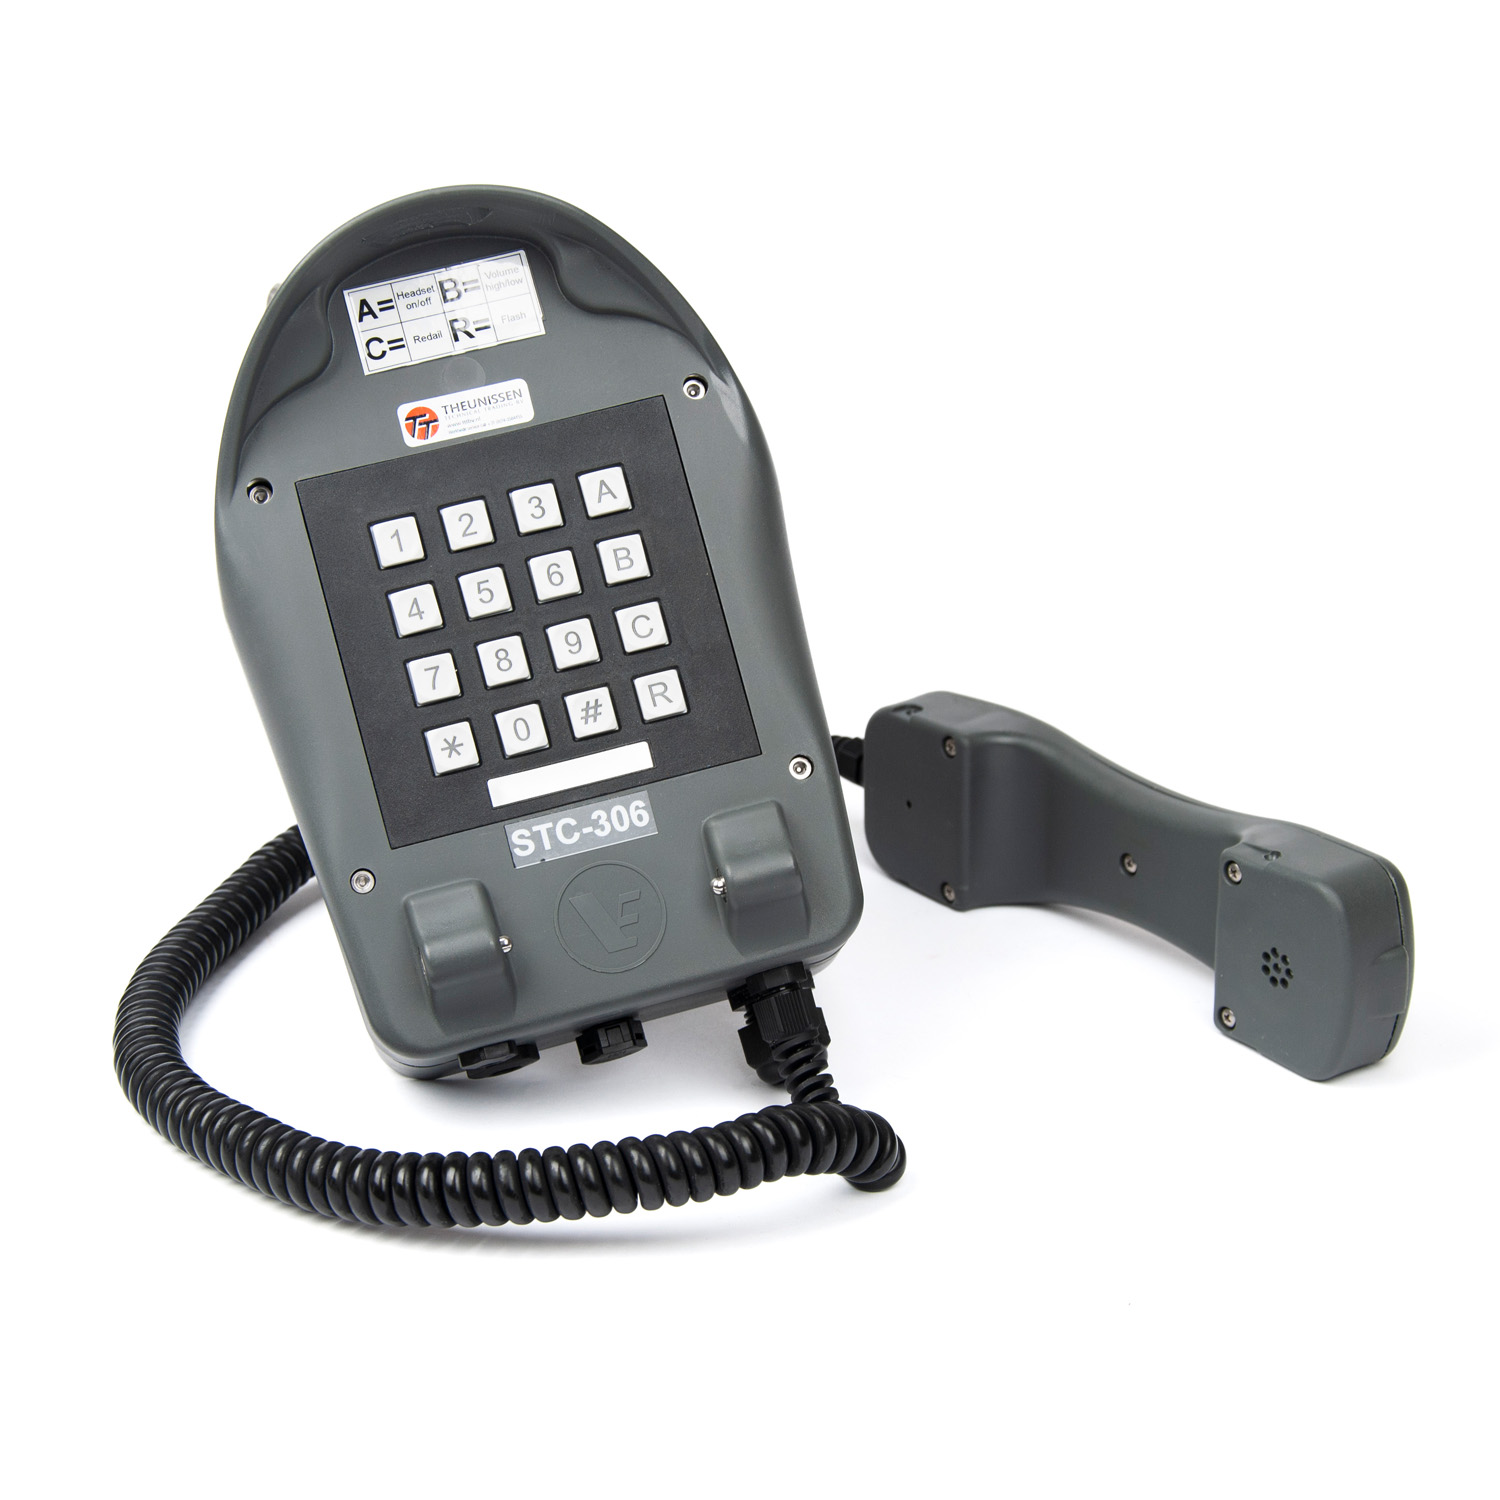 STC-306 Watertight telephone station with handset IP66